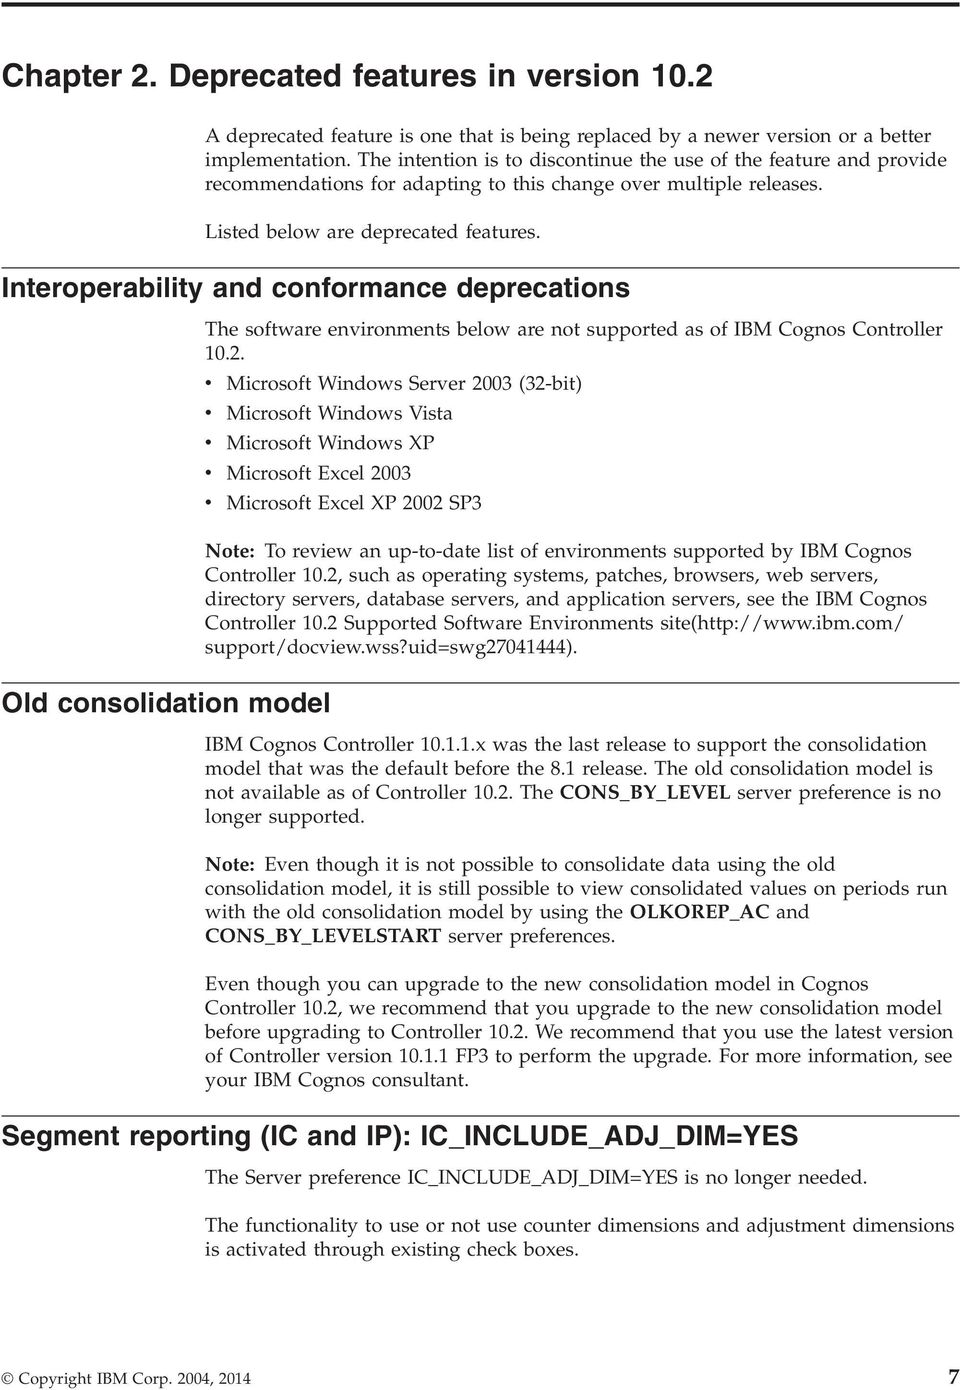 Interoperability and conformance deprecations Old consolidation model The software environments below are not supported as of IBM Cognos Controller 10.2.